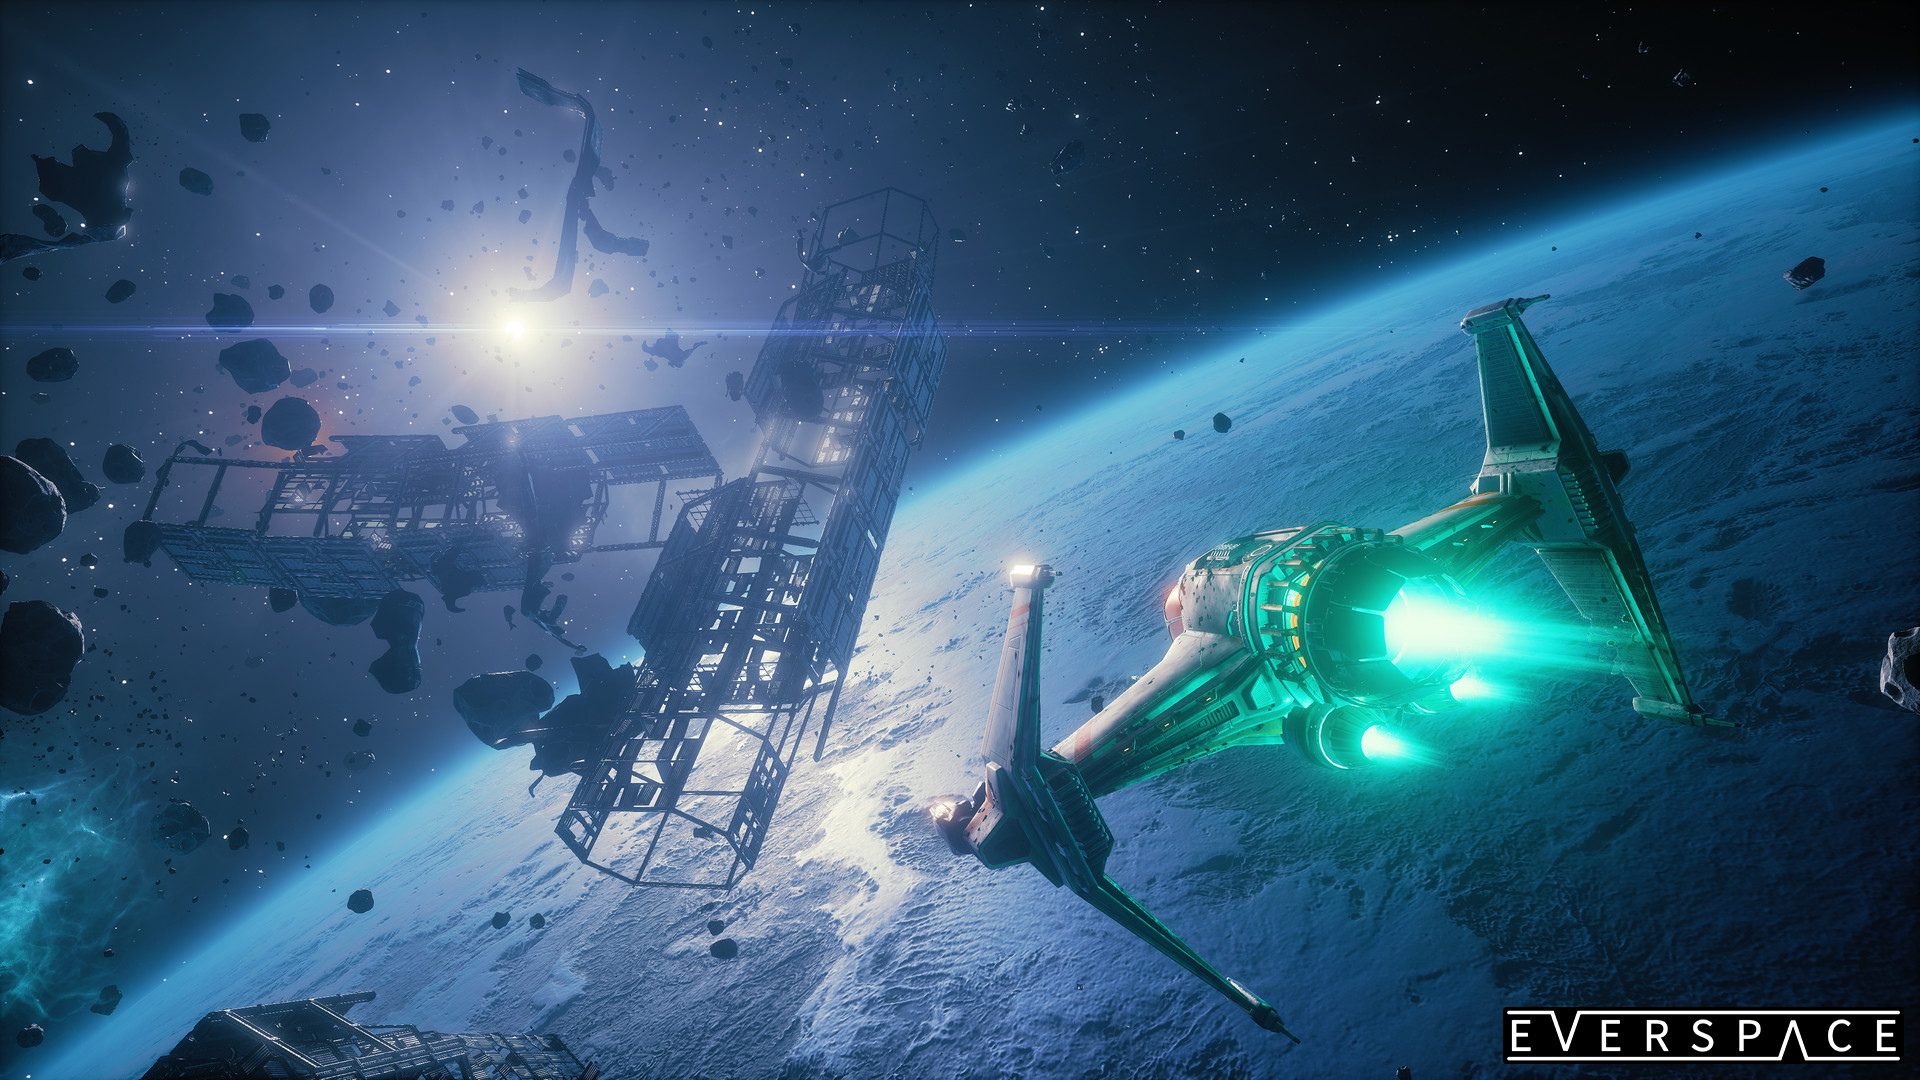 everspace 2 reviews